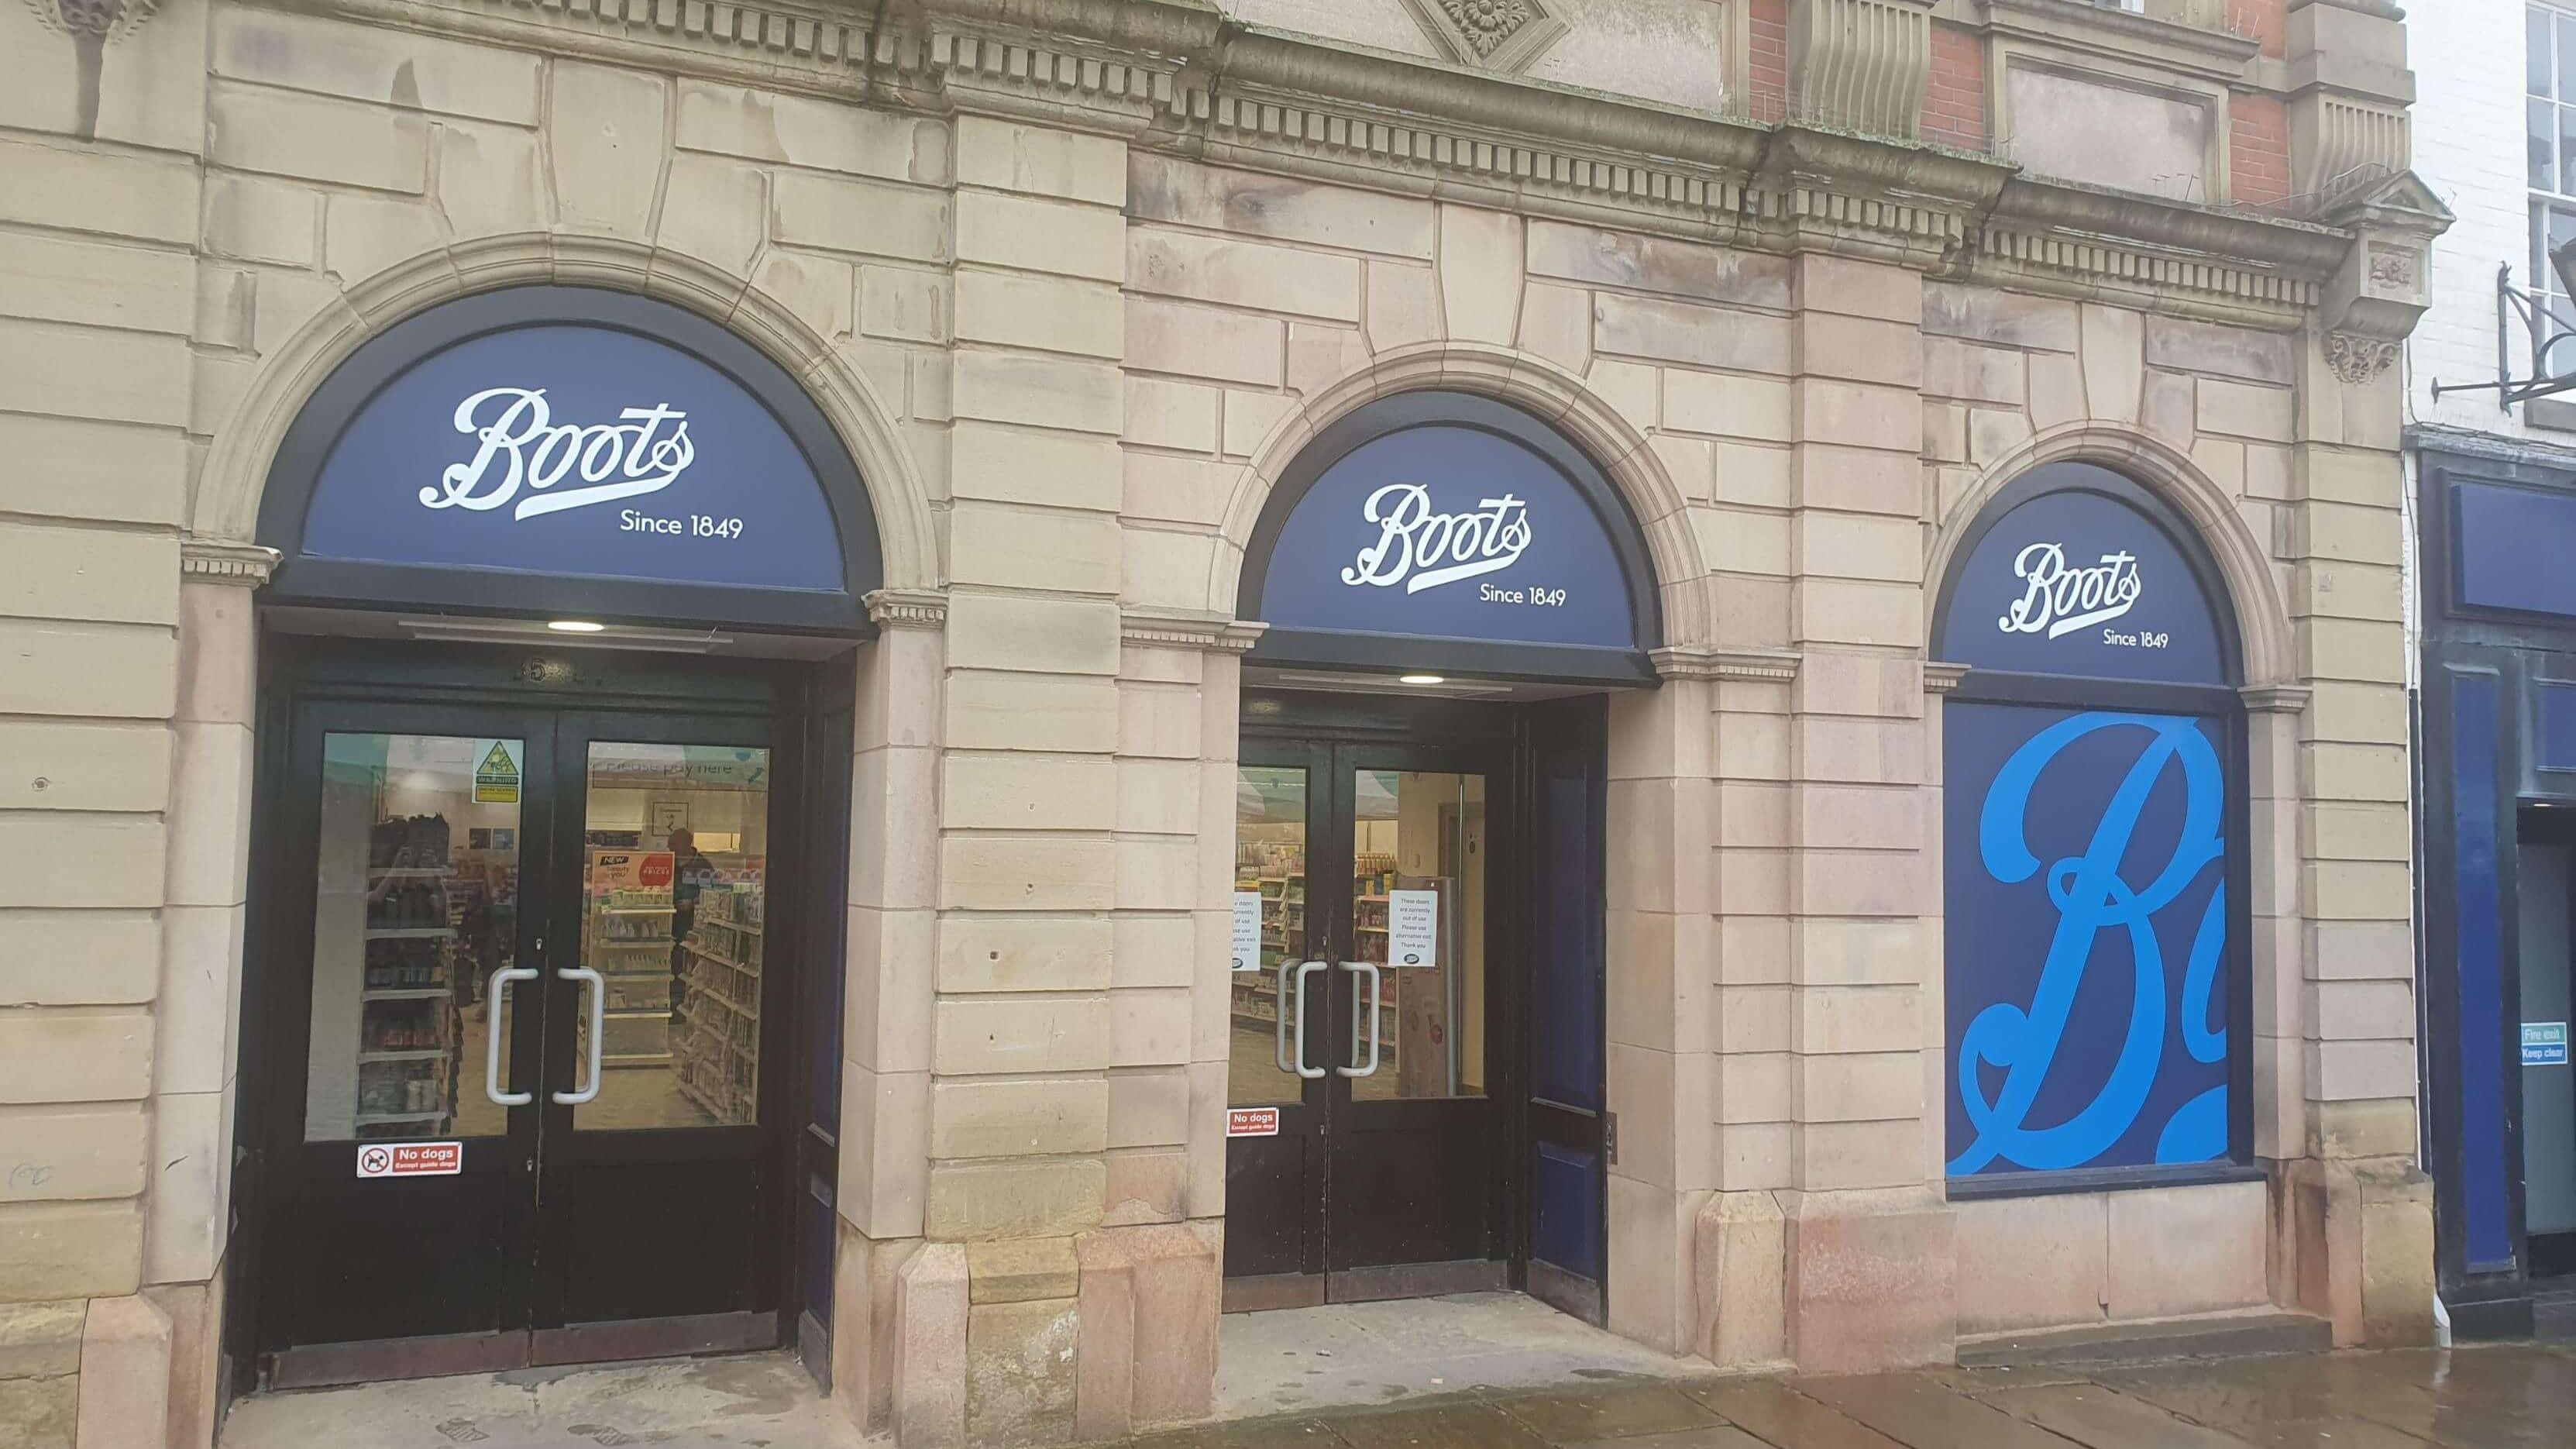 Images Boots Hearingcare Chesterfield